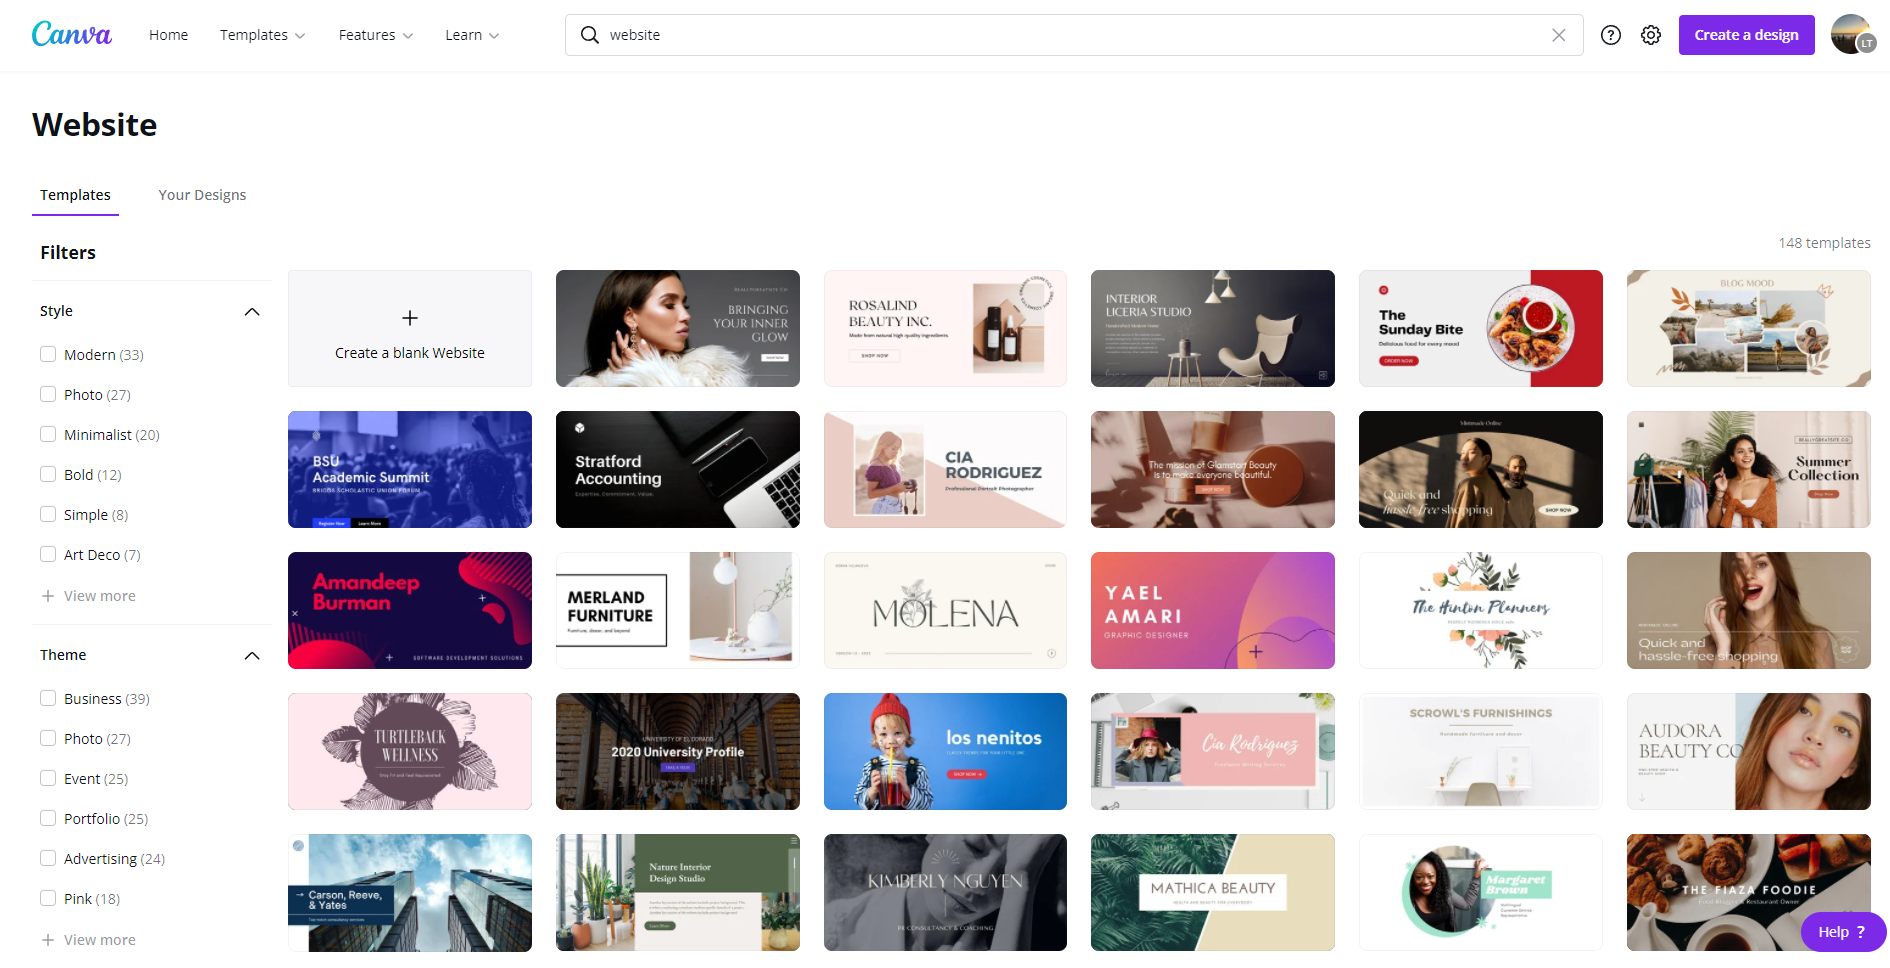 Different website templates available in Canva